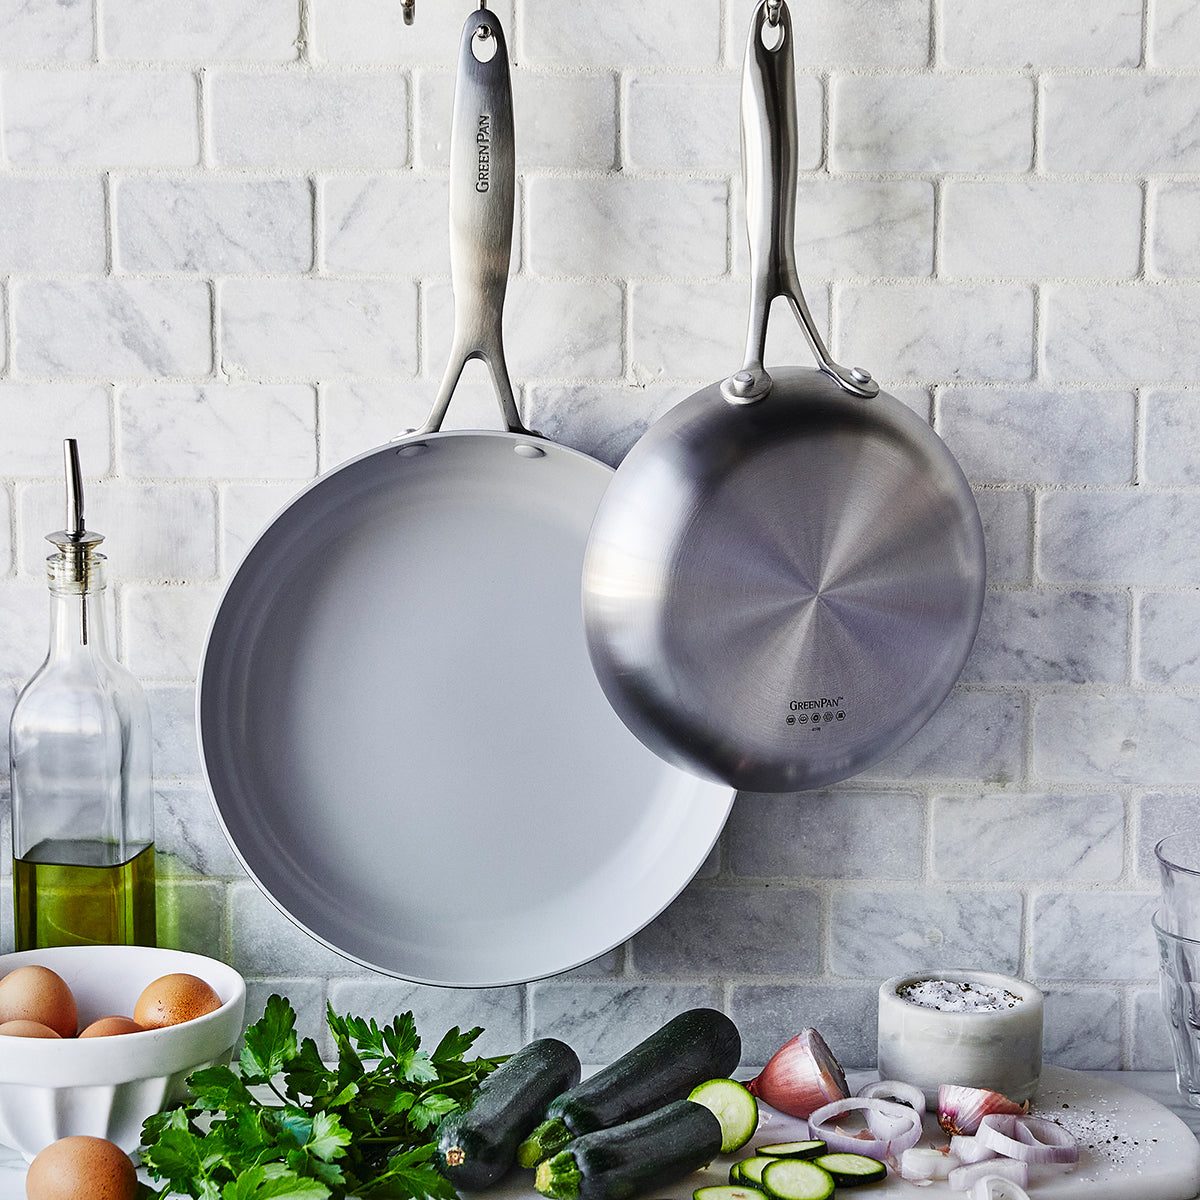 Pros and cons of ceramic cookware from Our Place, Green Pan